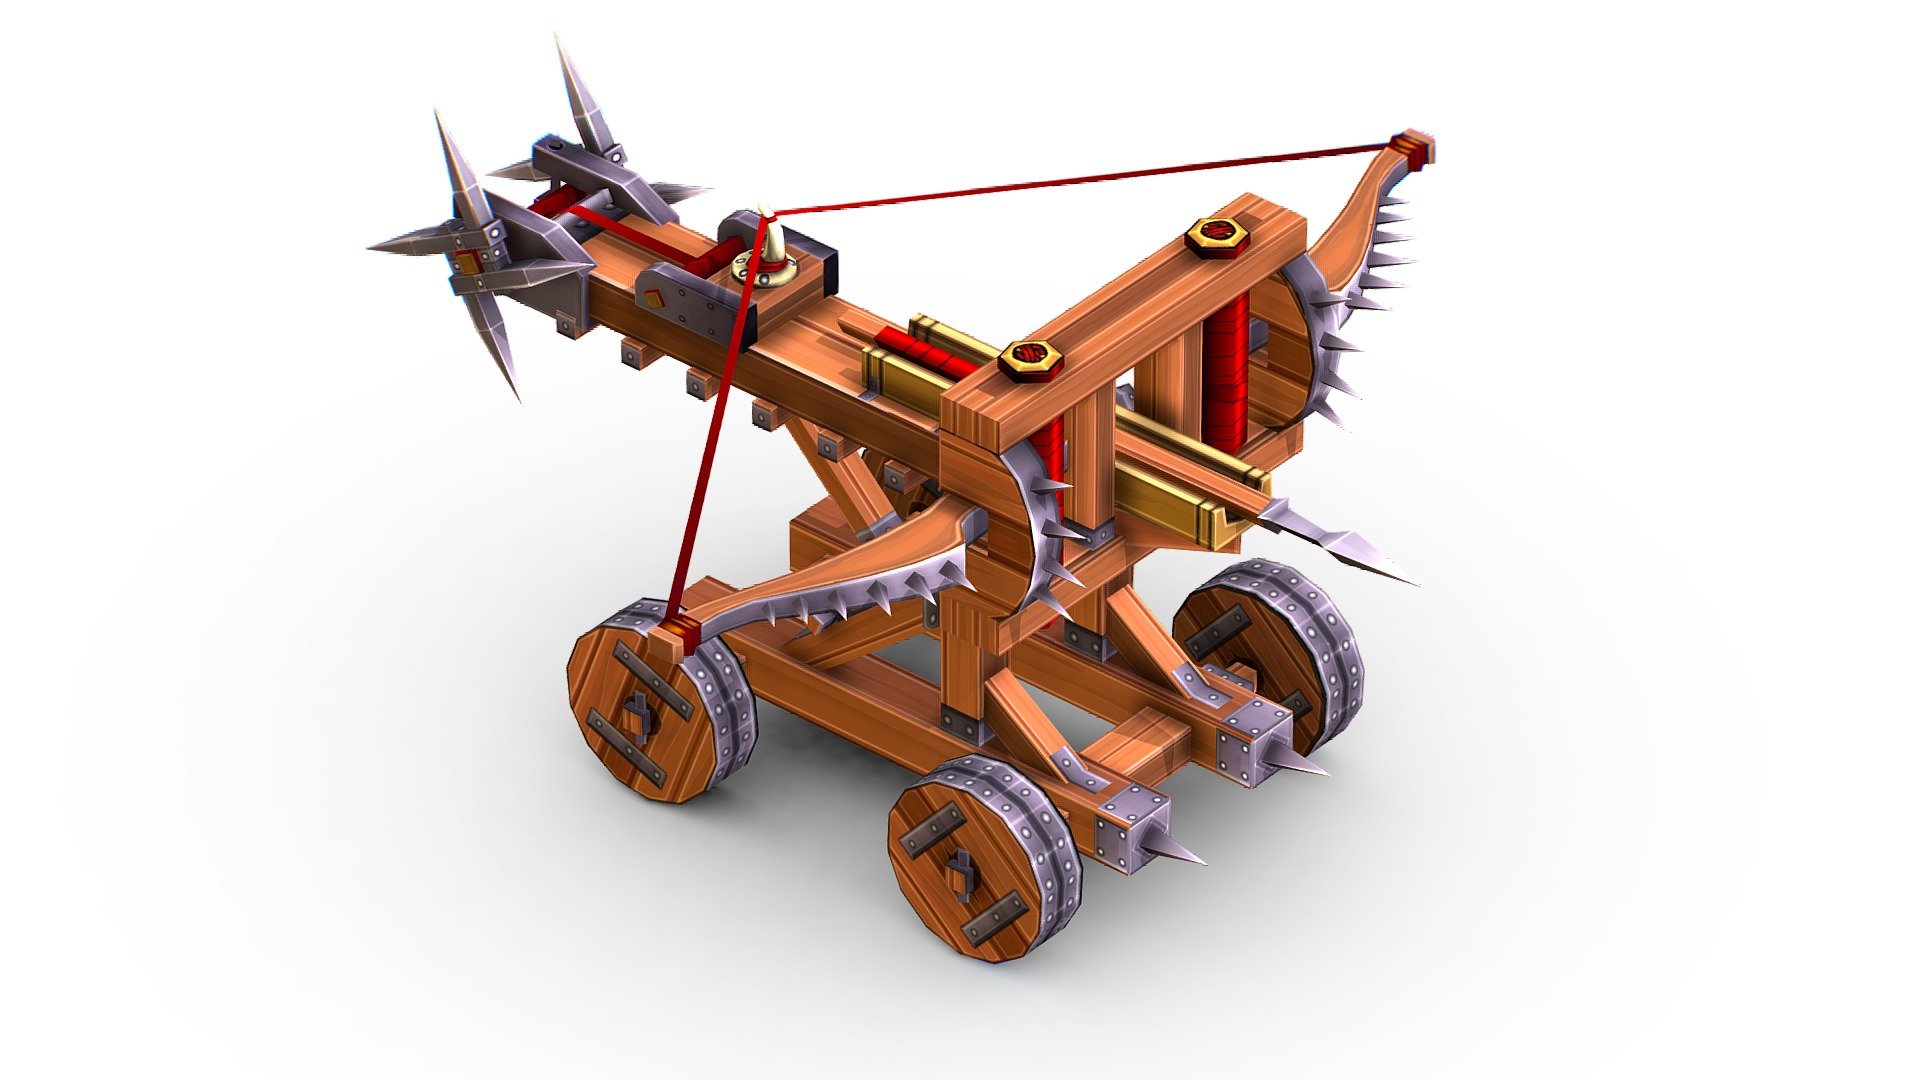 Handpaint Cartoon Medieval Ballista Siege Weapon - 3dsMax and Maya file included - Texture size 2048 color map 3d model